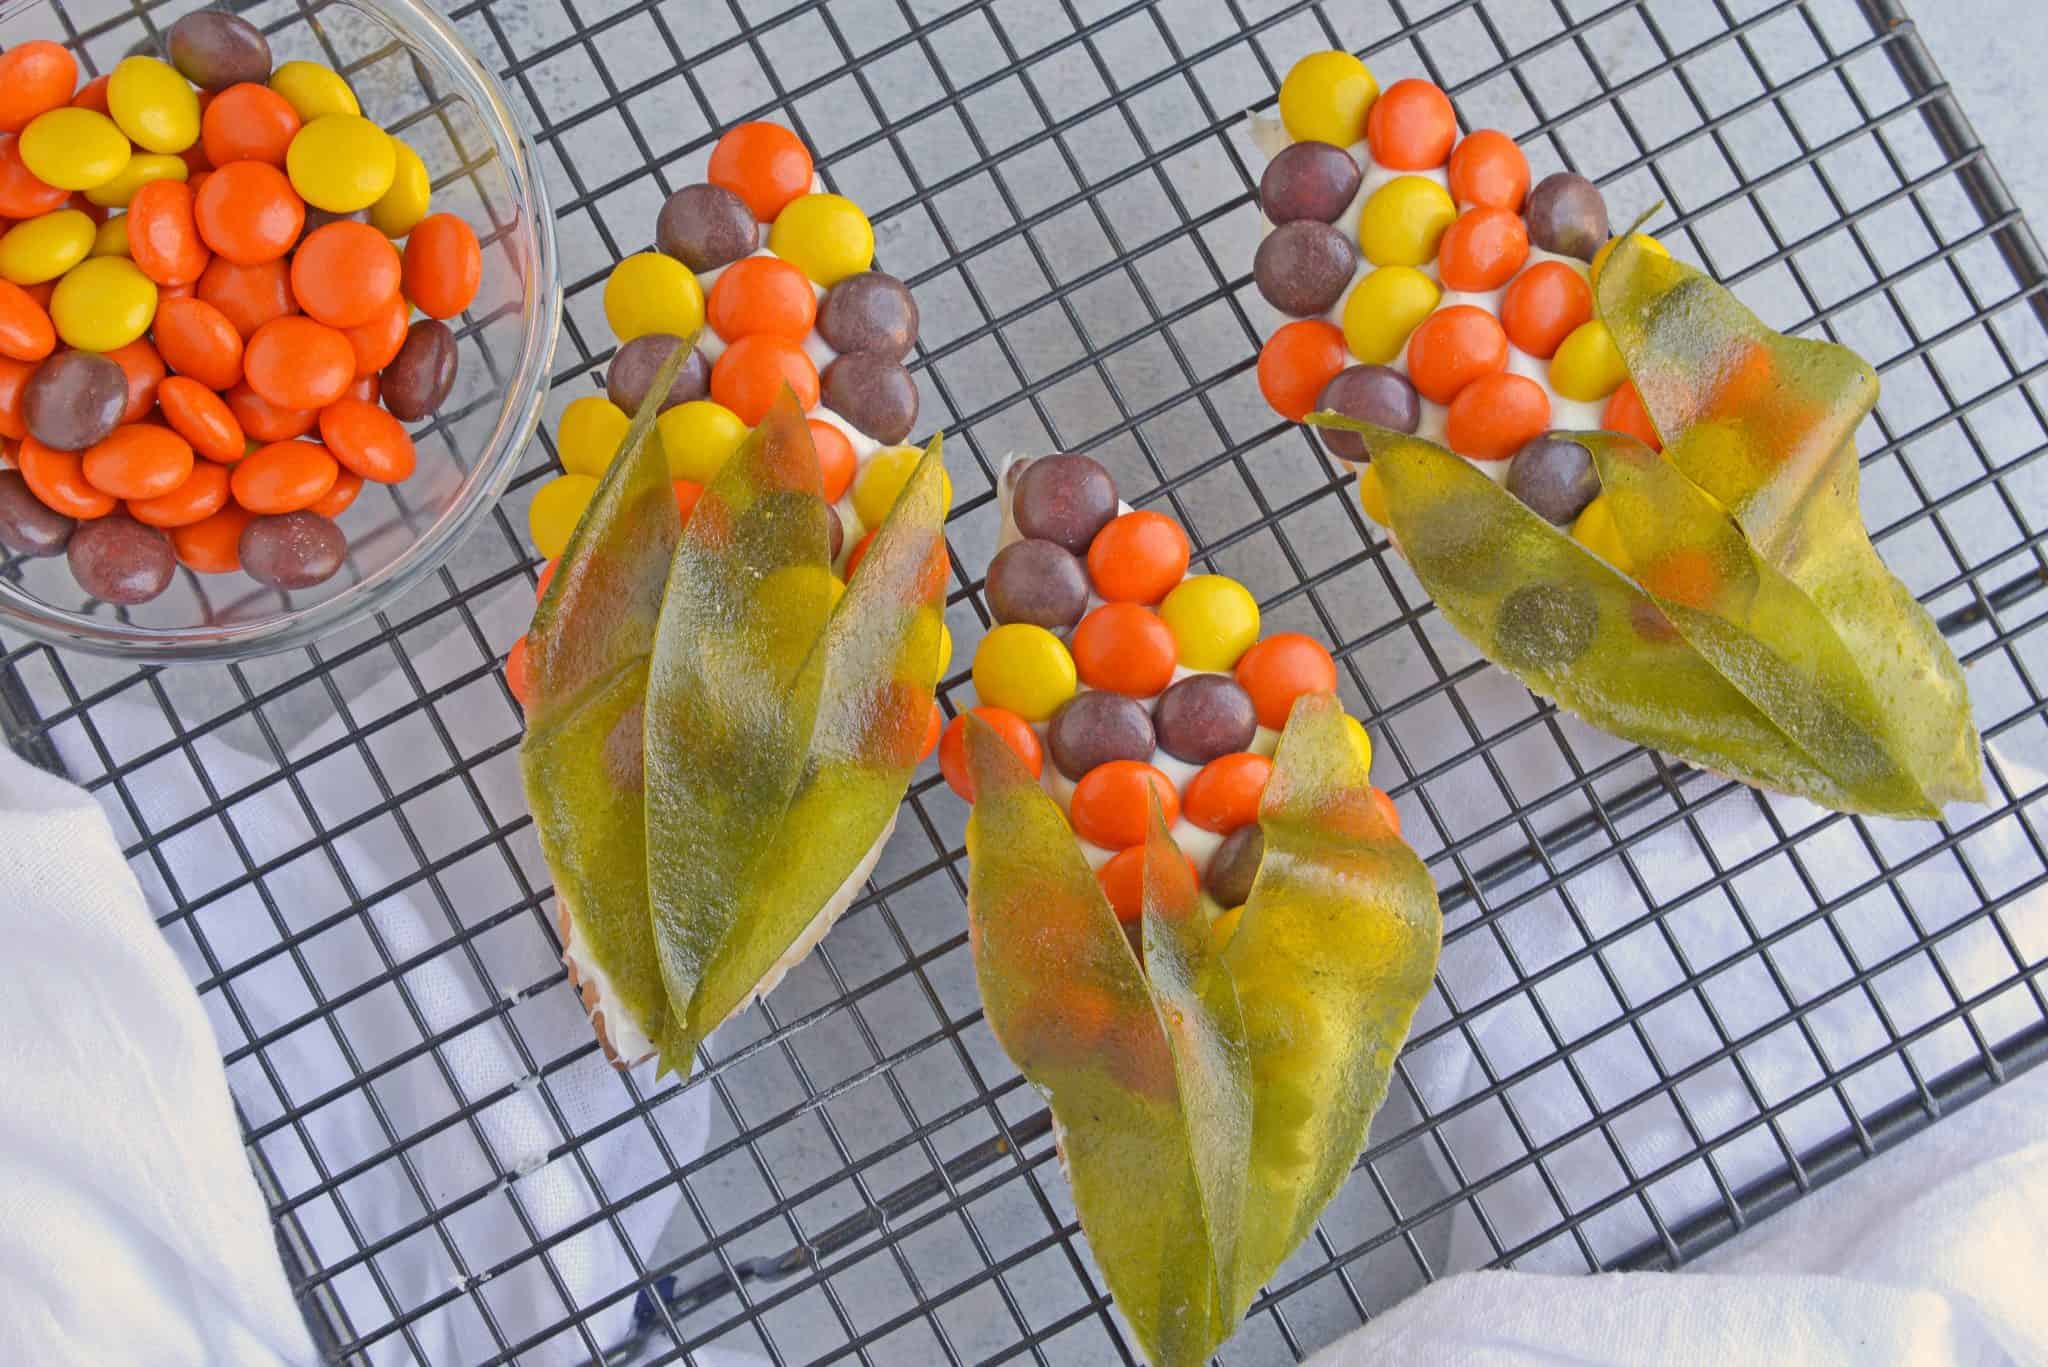 Thanksgiving Cookies are super cute sugar cookie cutouts that can be made alongside your Thanksgiving Turkey Cookies! #sugarcookiecutoutrecipe #thanksgivingcookies #thanksgivingturkeycookies www.savoryexperiments.com